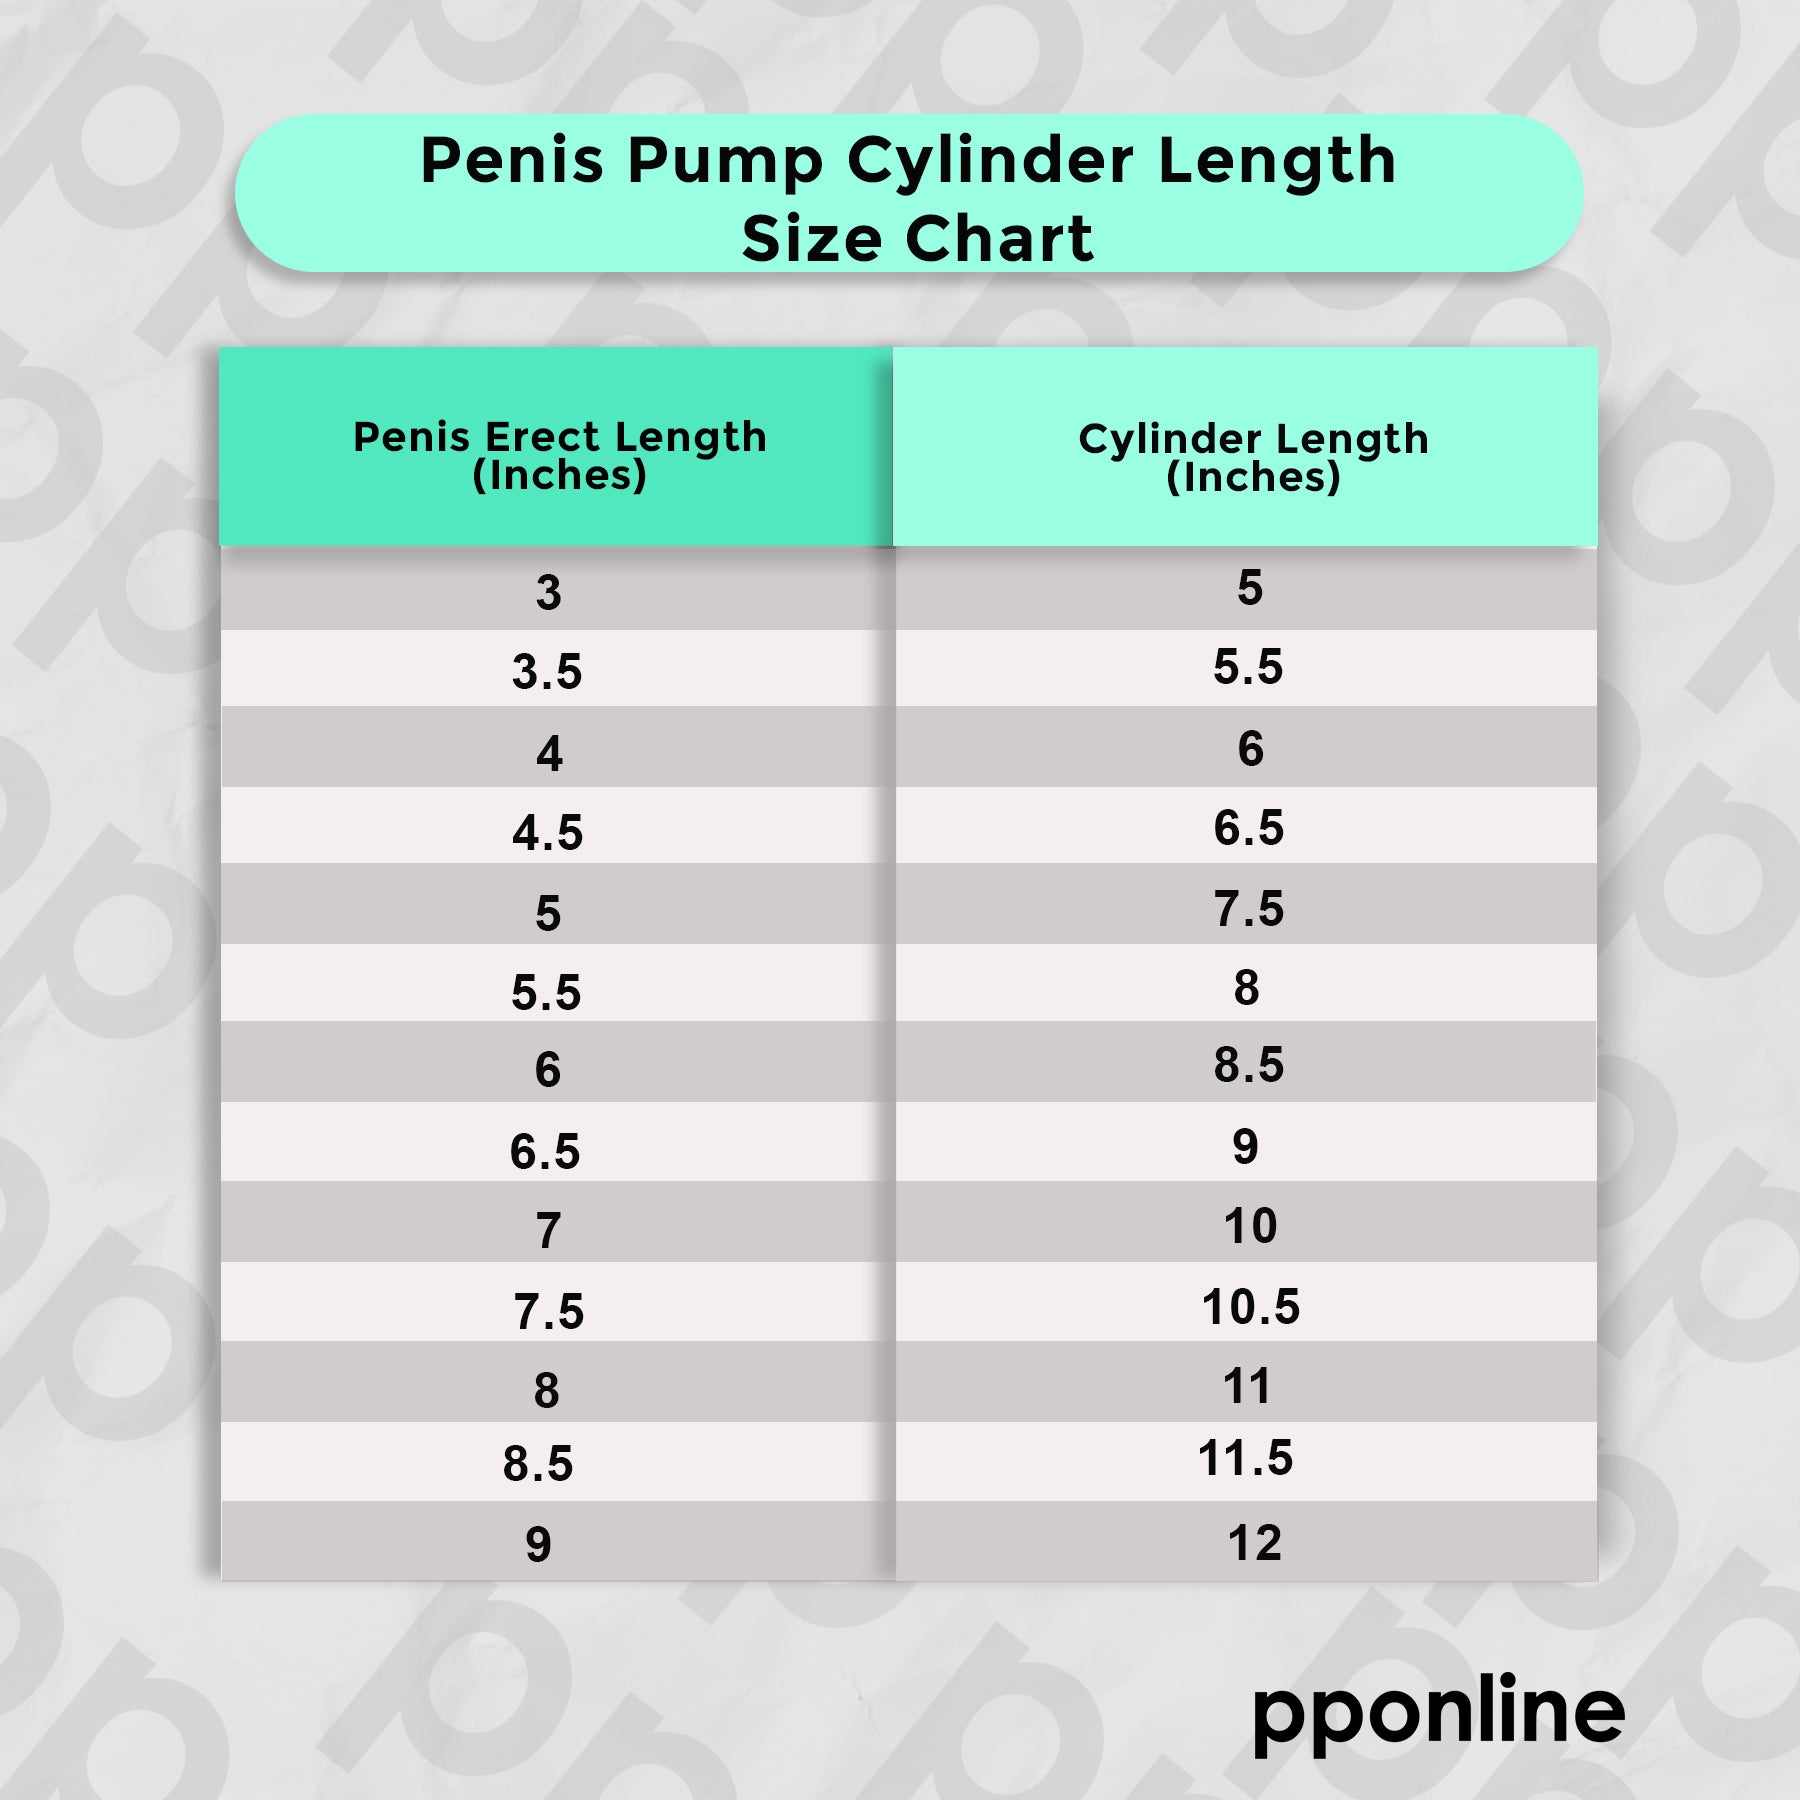 Find Your Cylinder Penis Pump Size Length in Inches